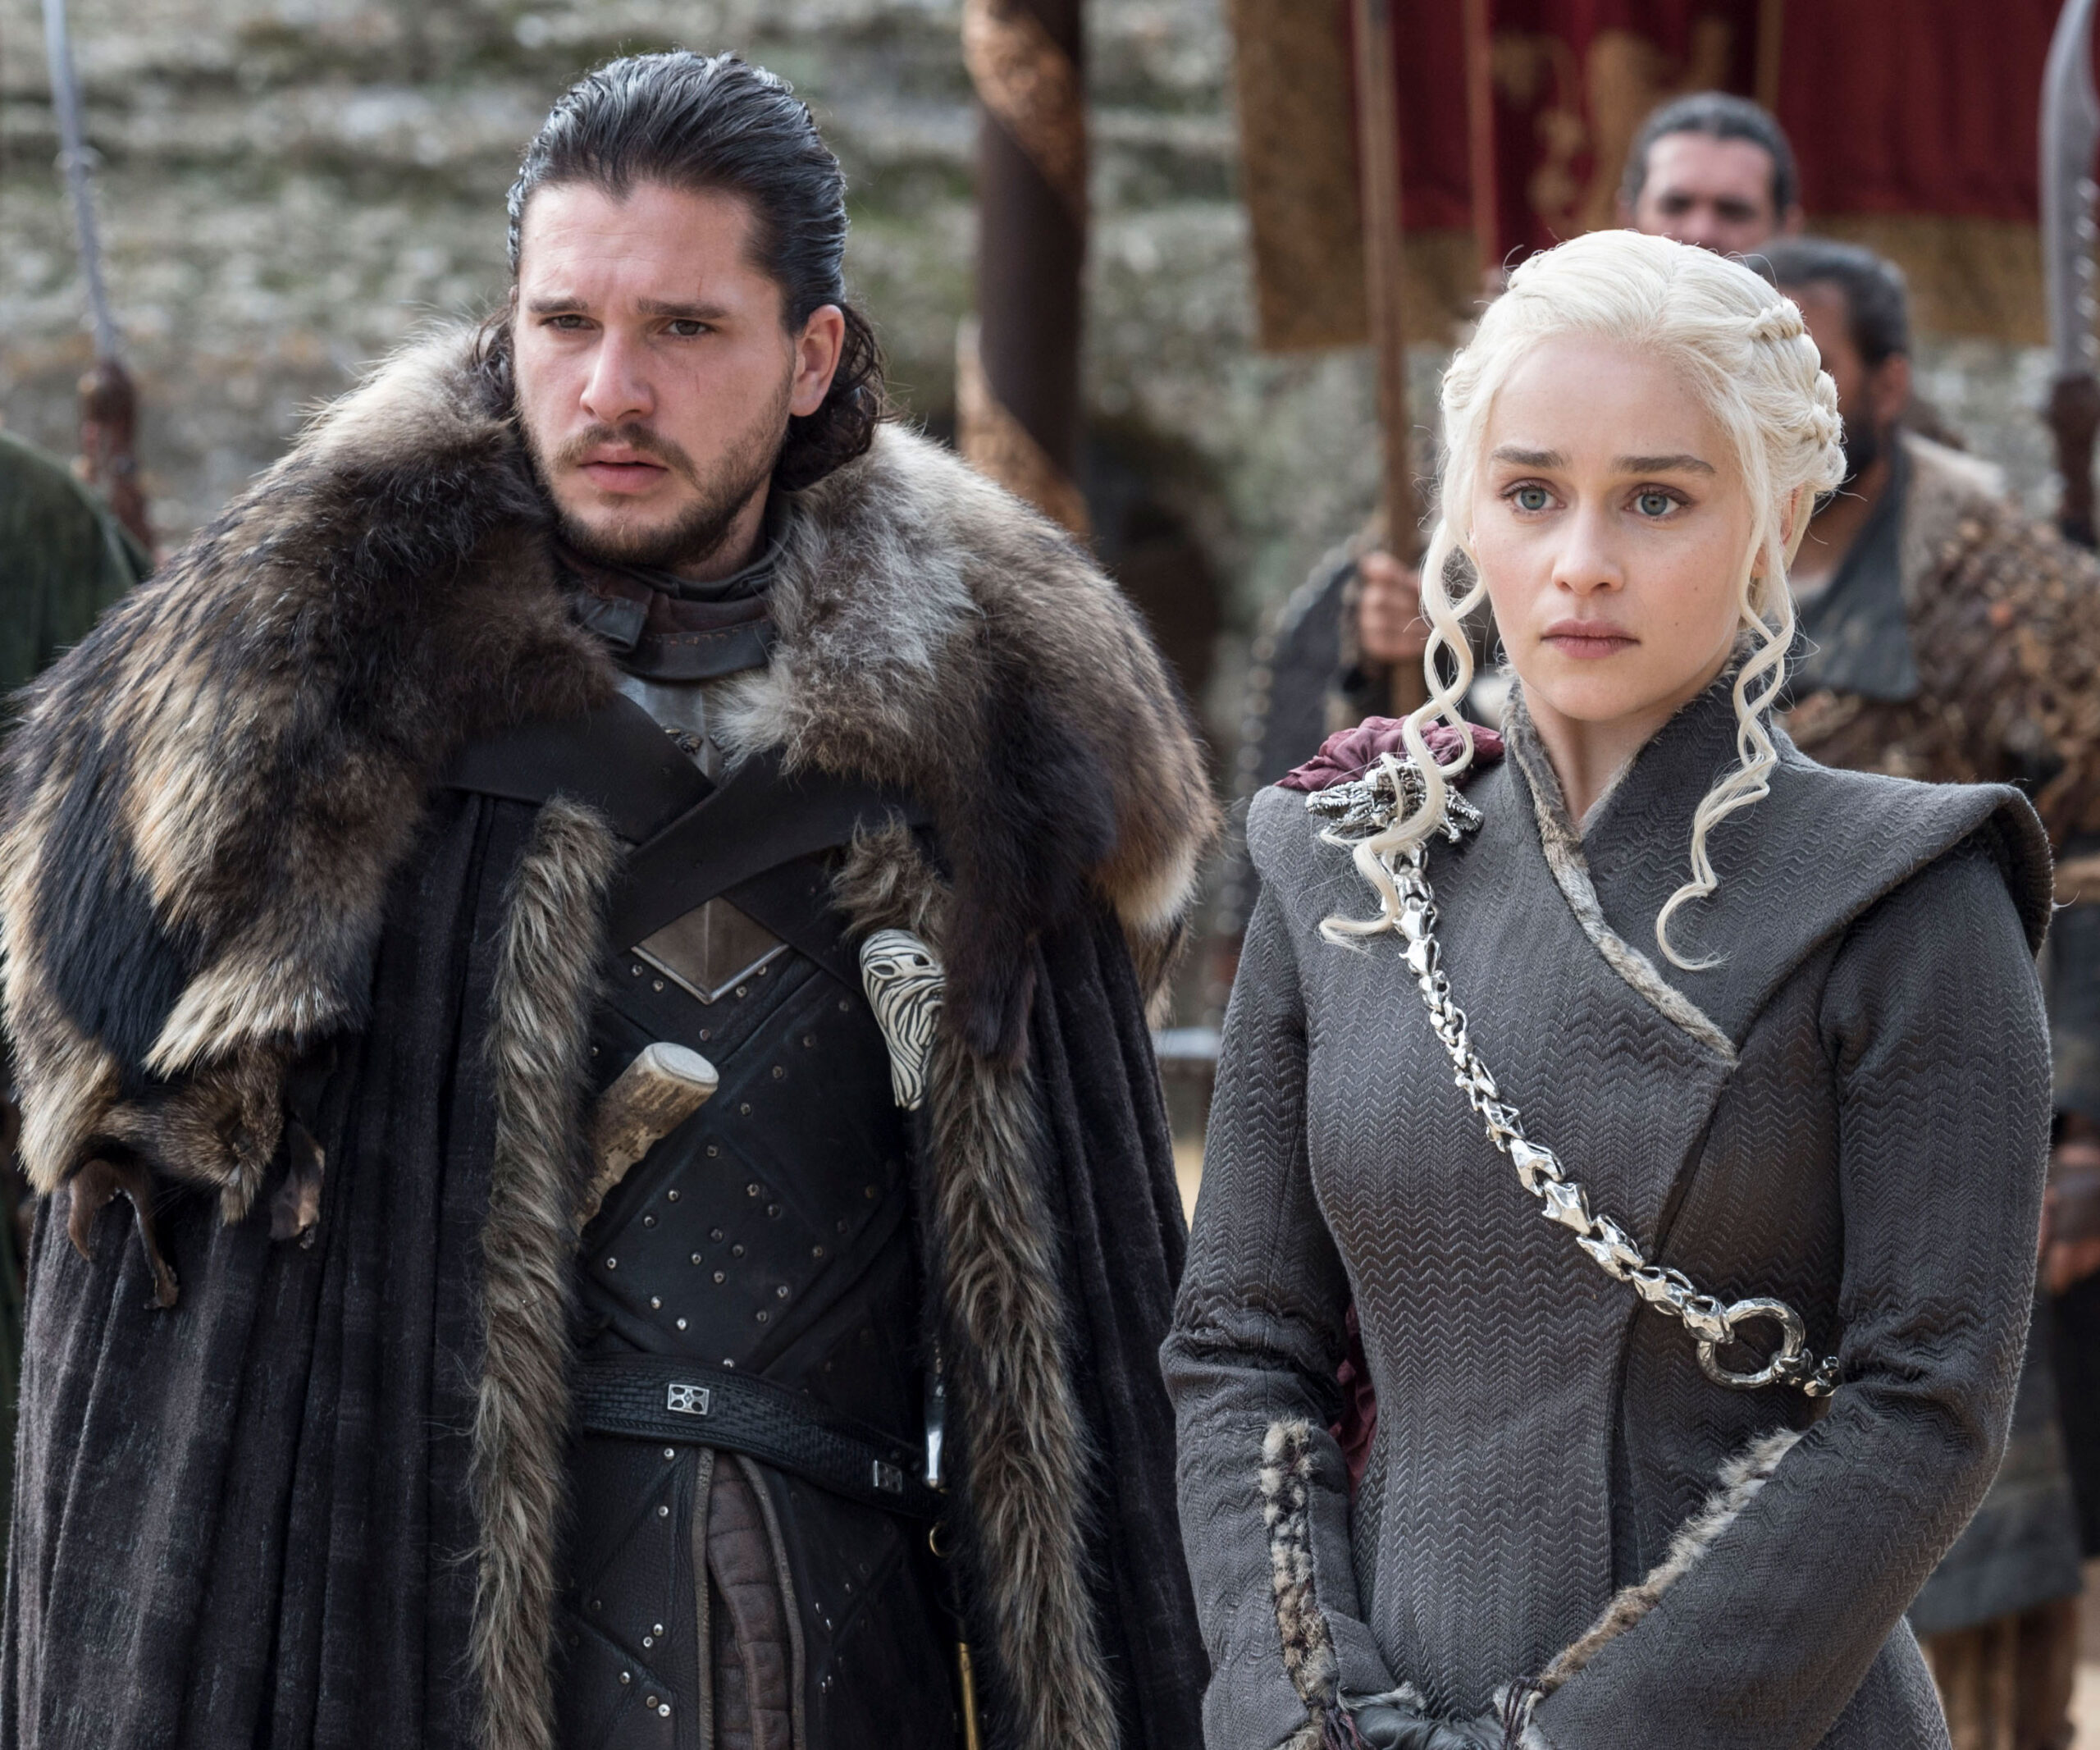 Kit Harington warns not all Game of Thrones fans will be happy with the ending